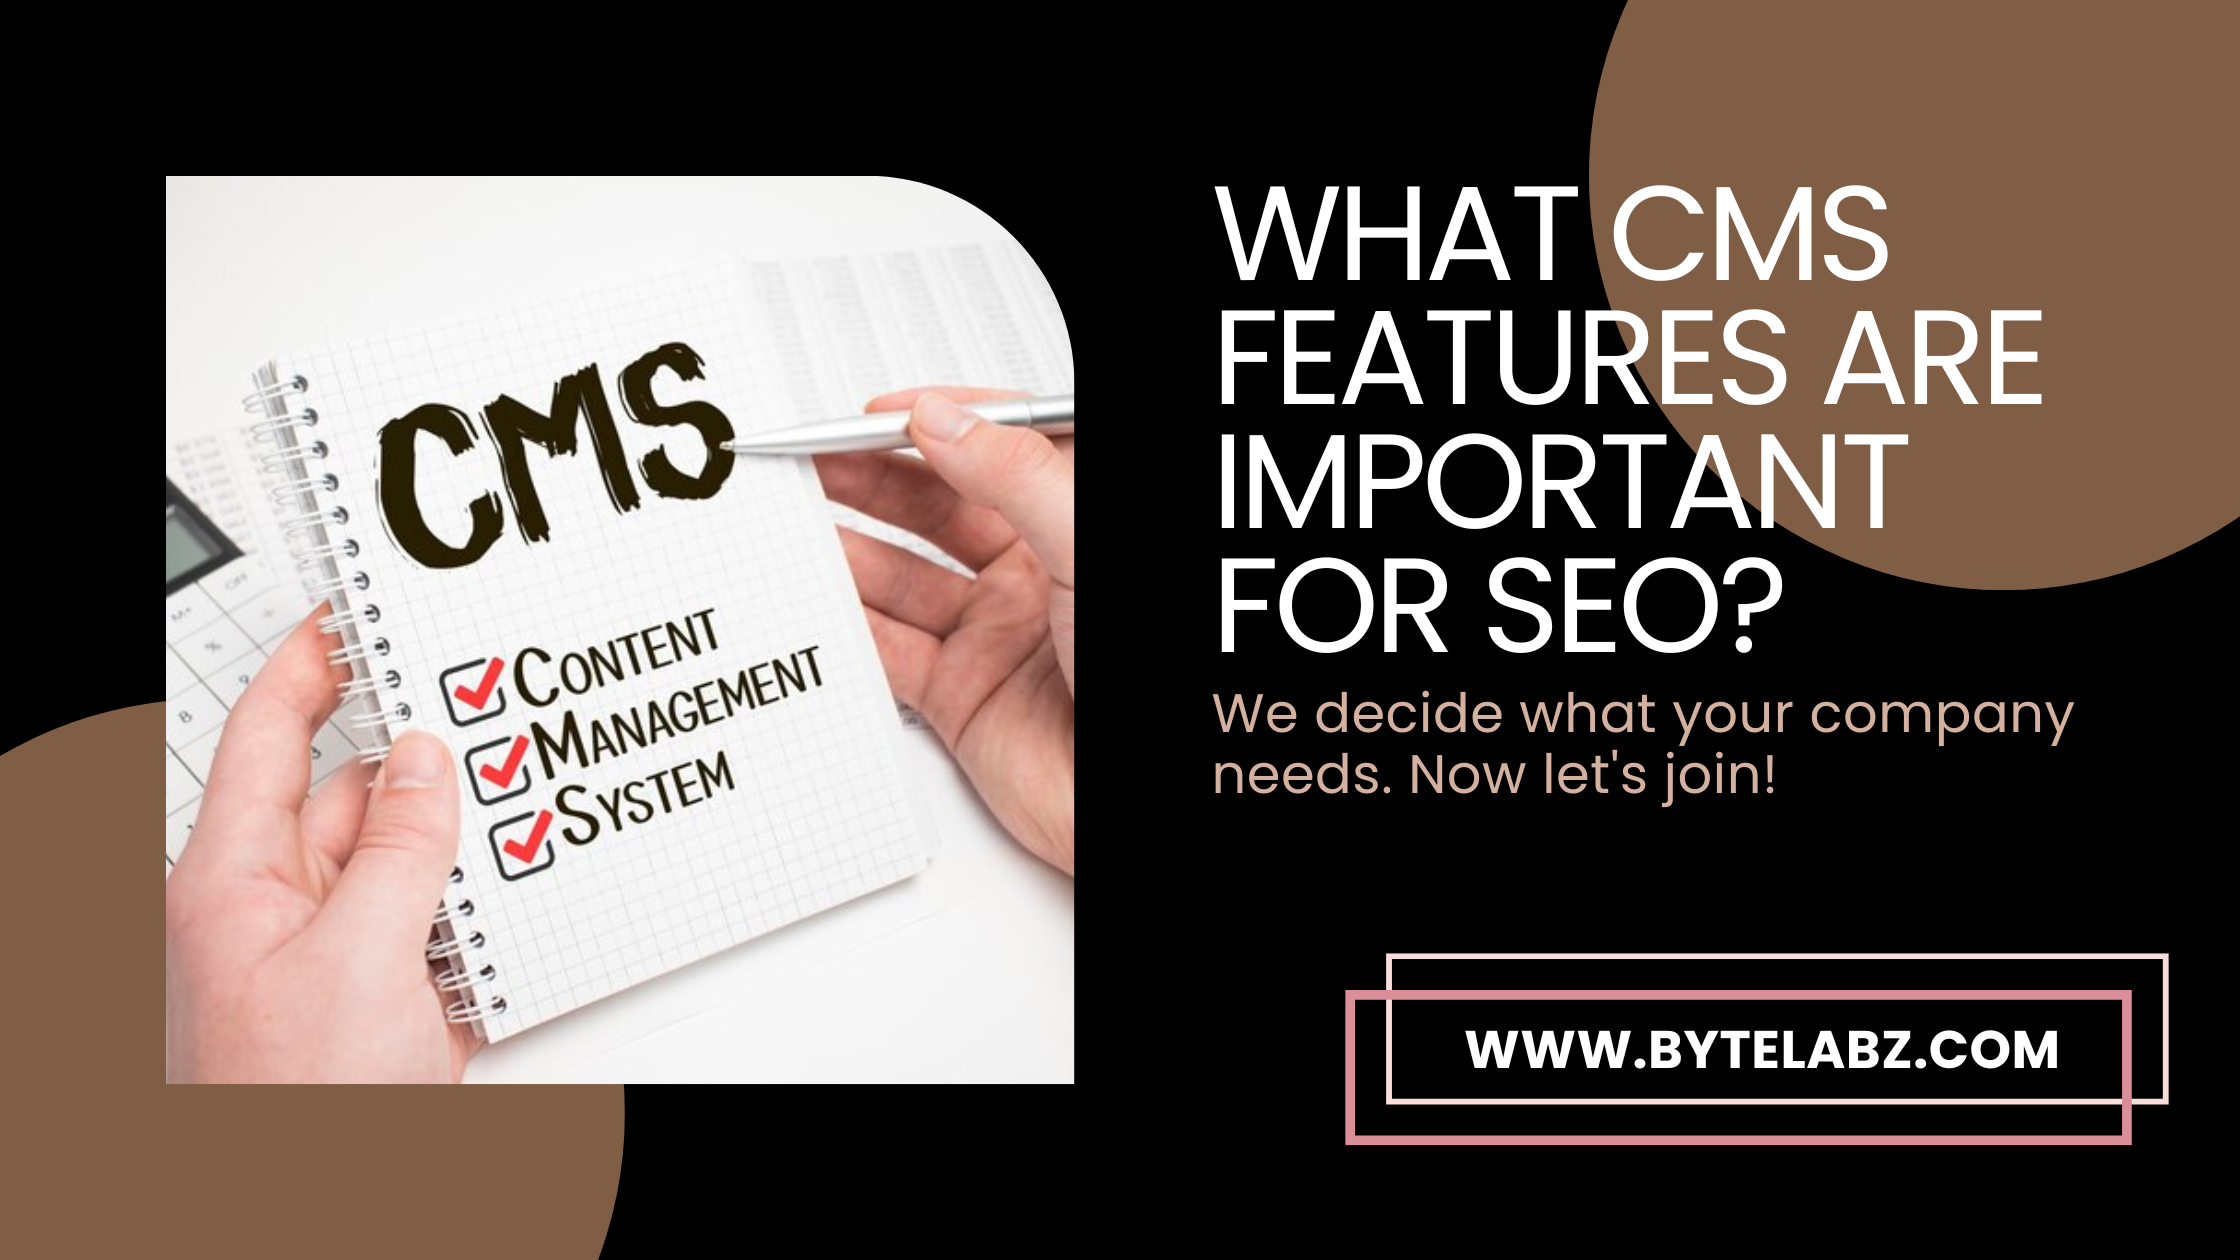 What features of a CMS are essential for SEO?